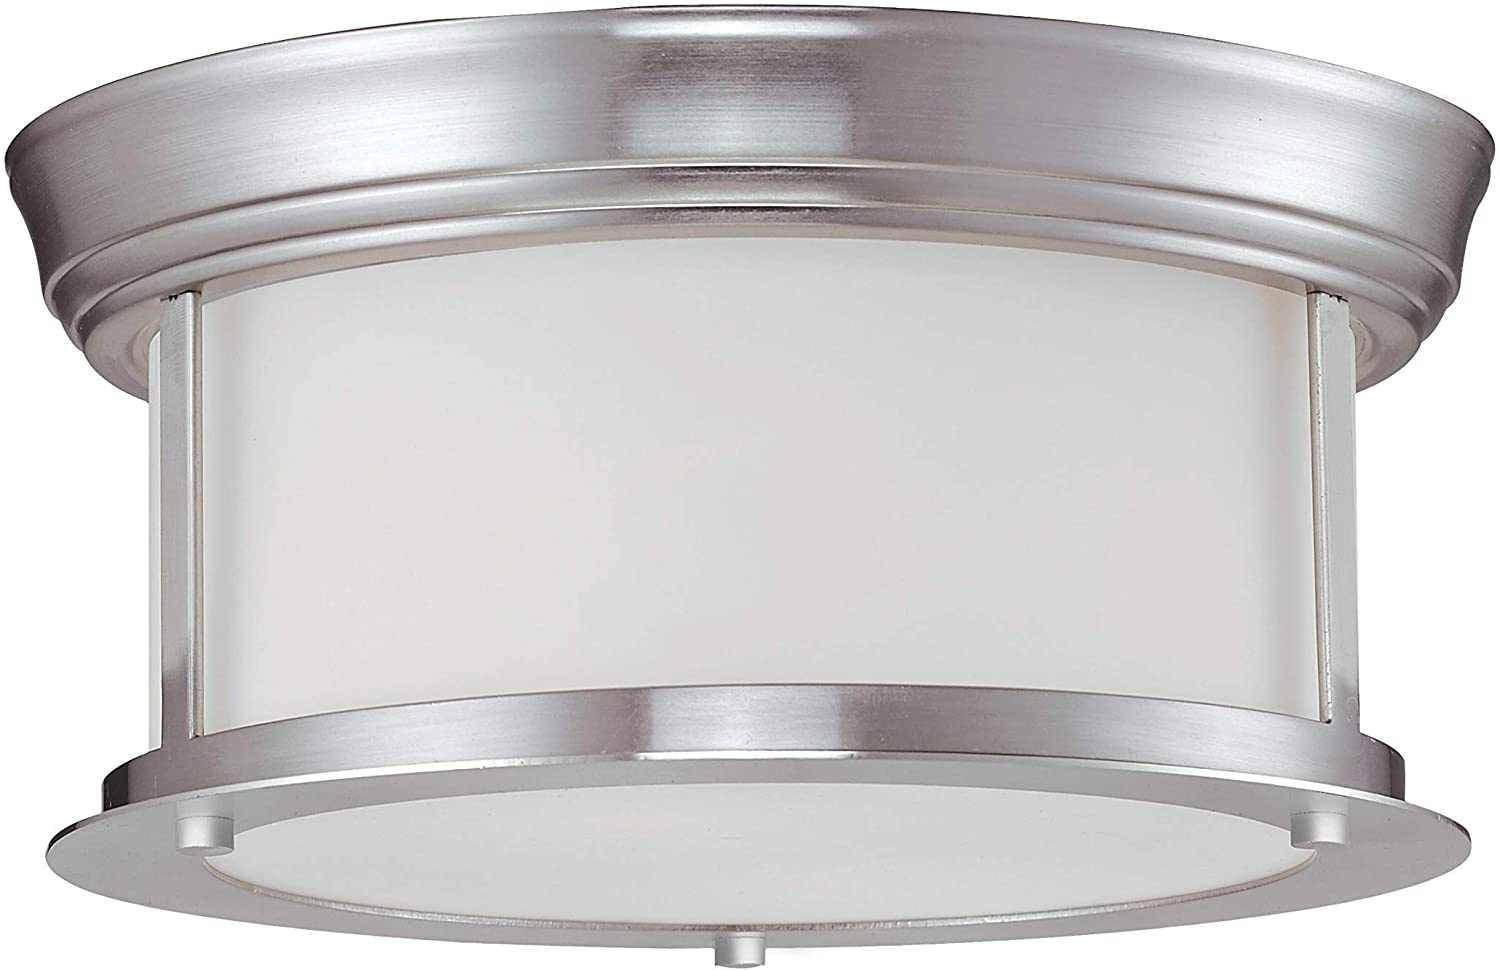 2 Light Ceiling Lamp Brushed Nickel Modern Contemporary Glass Metal